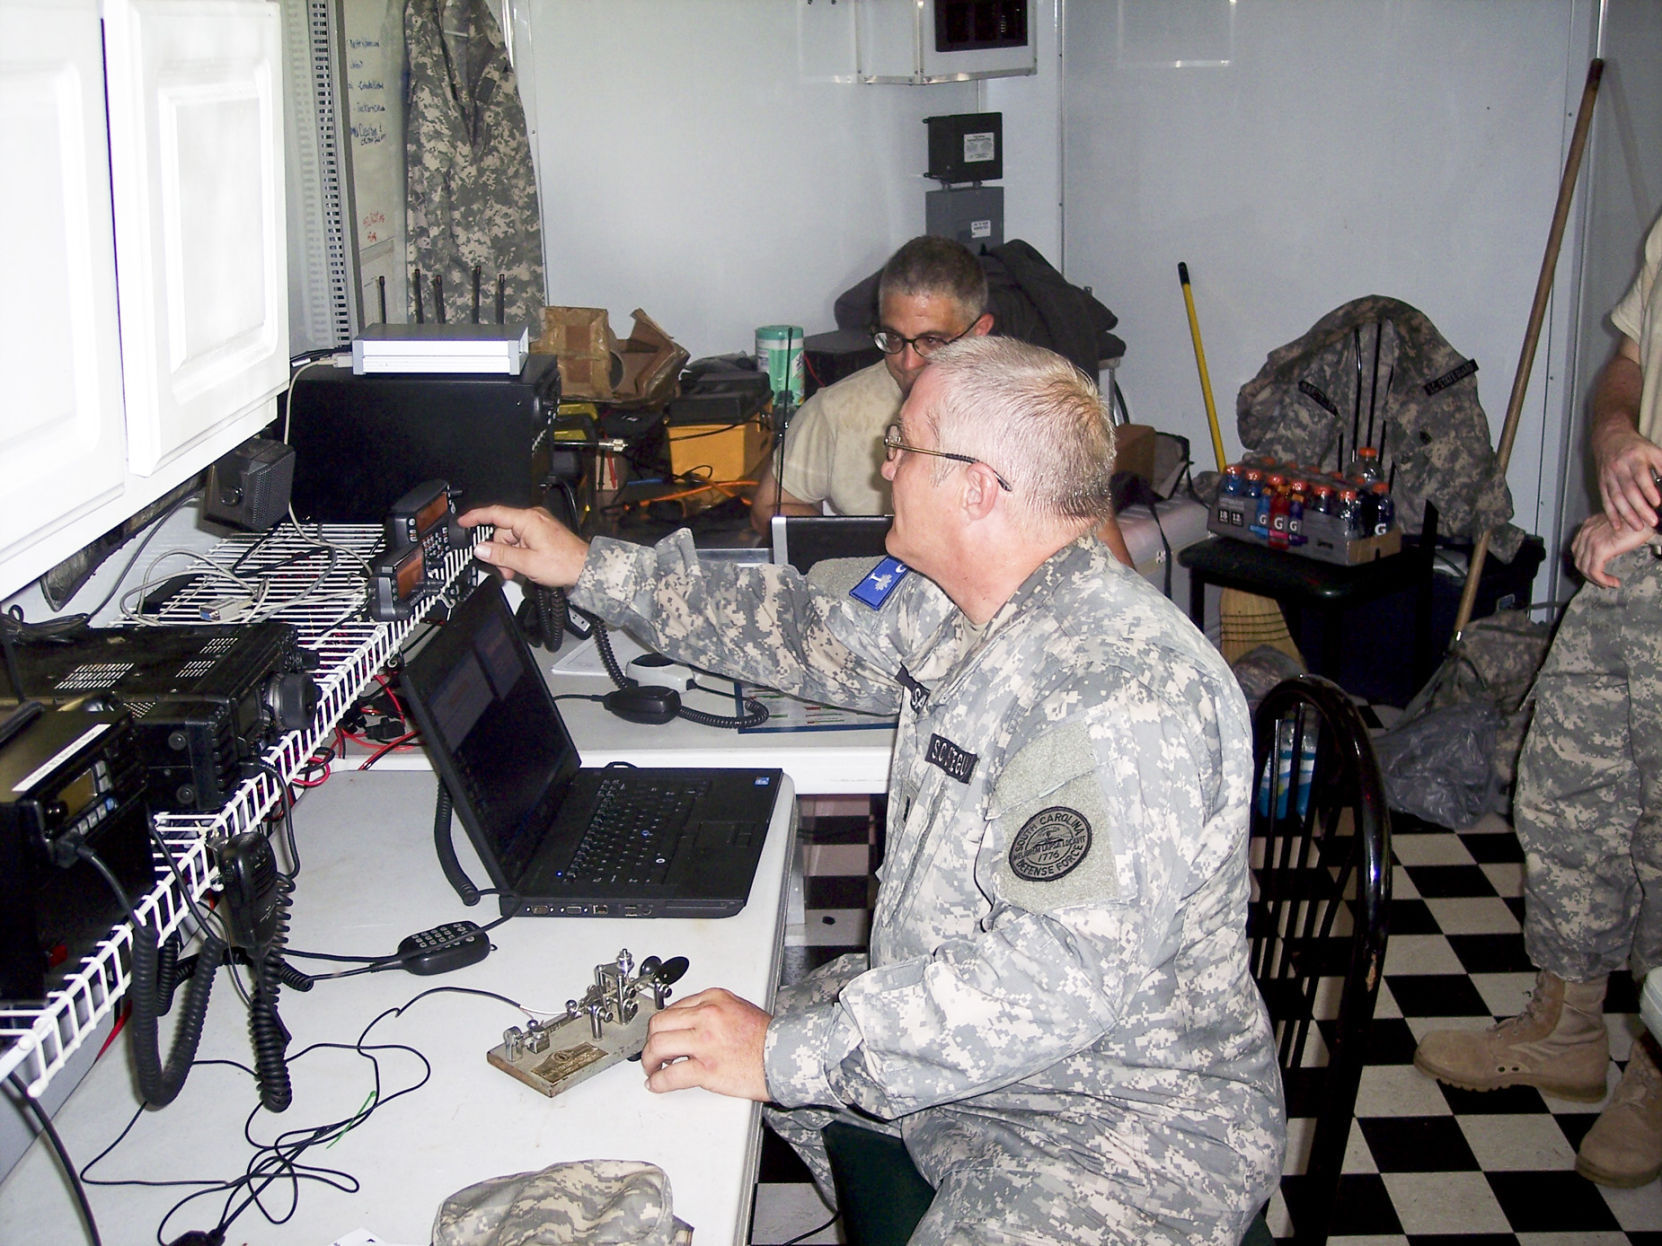 Vital connections Amateur Radio Field Day tests emergency communications nationwide